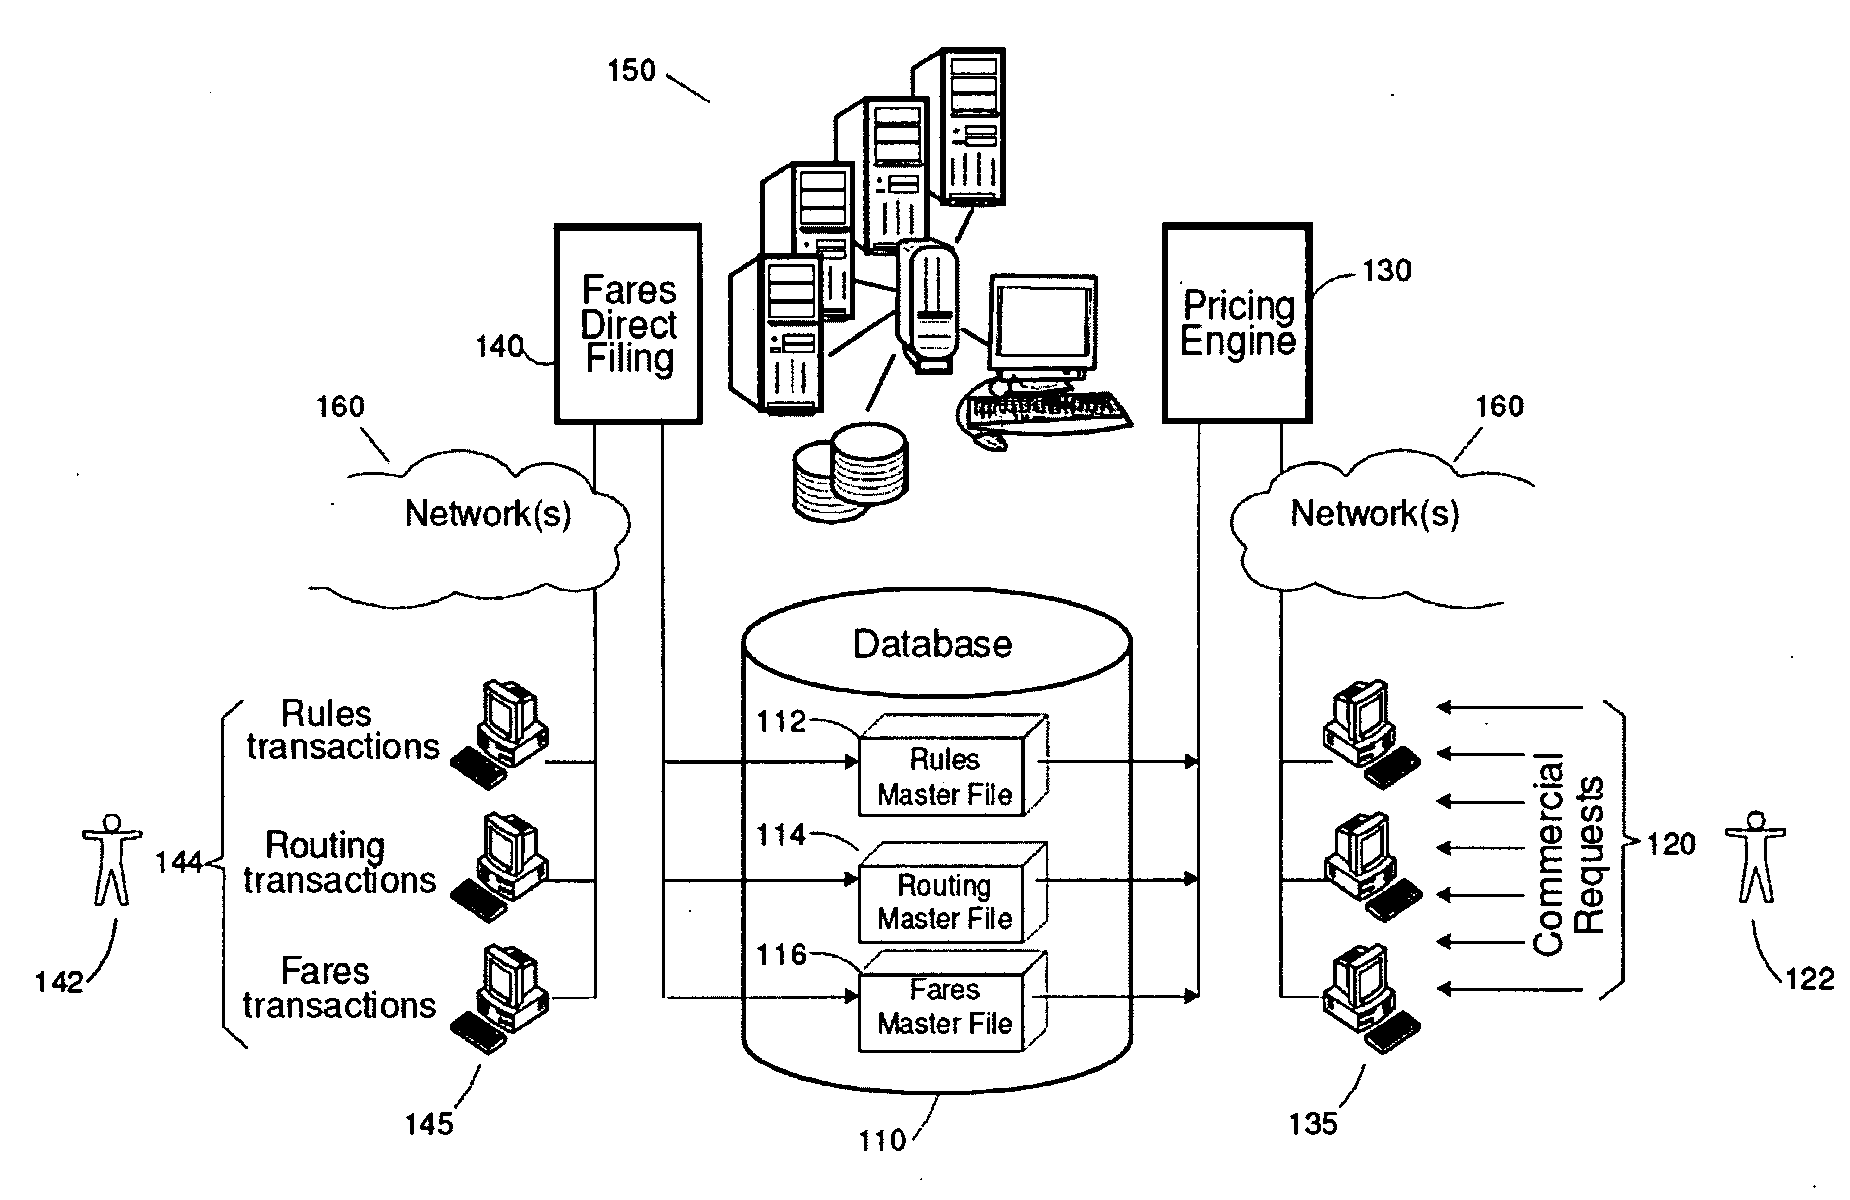 Method allowing validation in a production database of new entered data prior to their release